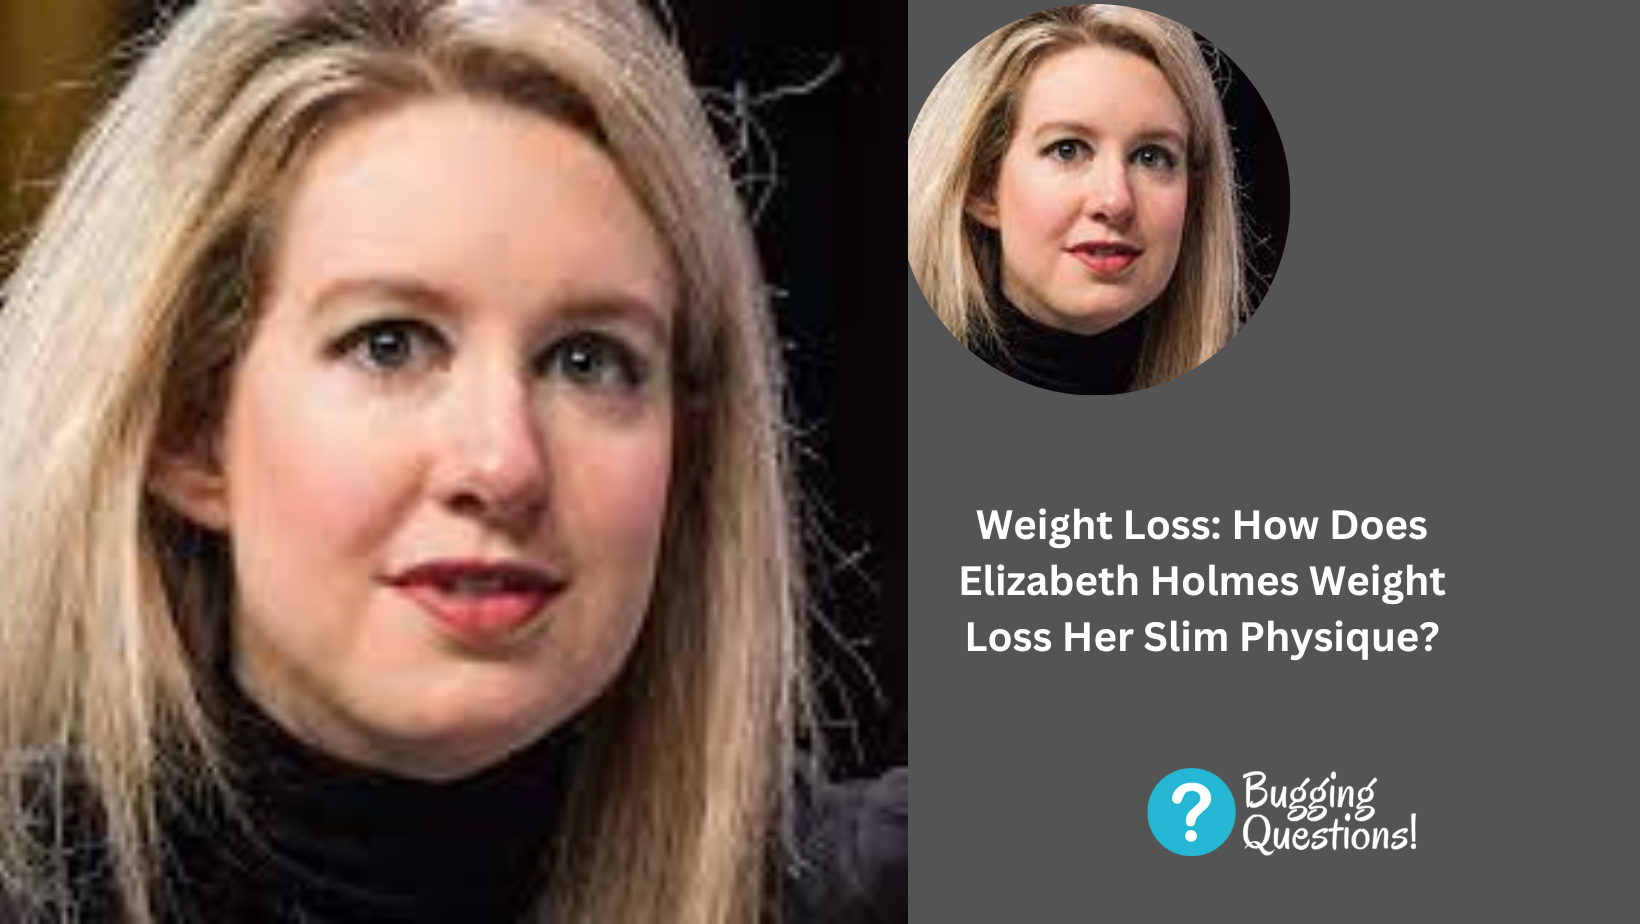 Weight Loss: How Does Elizabeth Holmes Weight Loss Her Slim Physique?